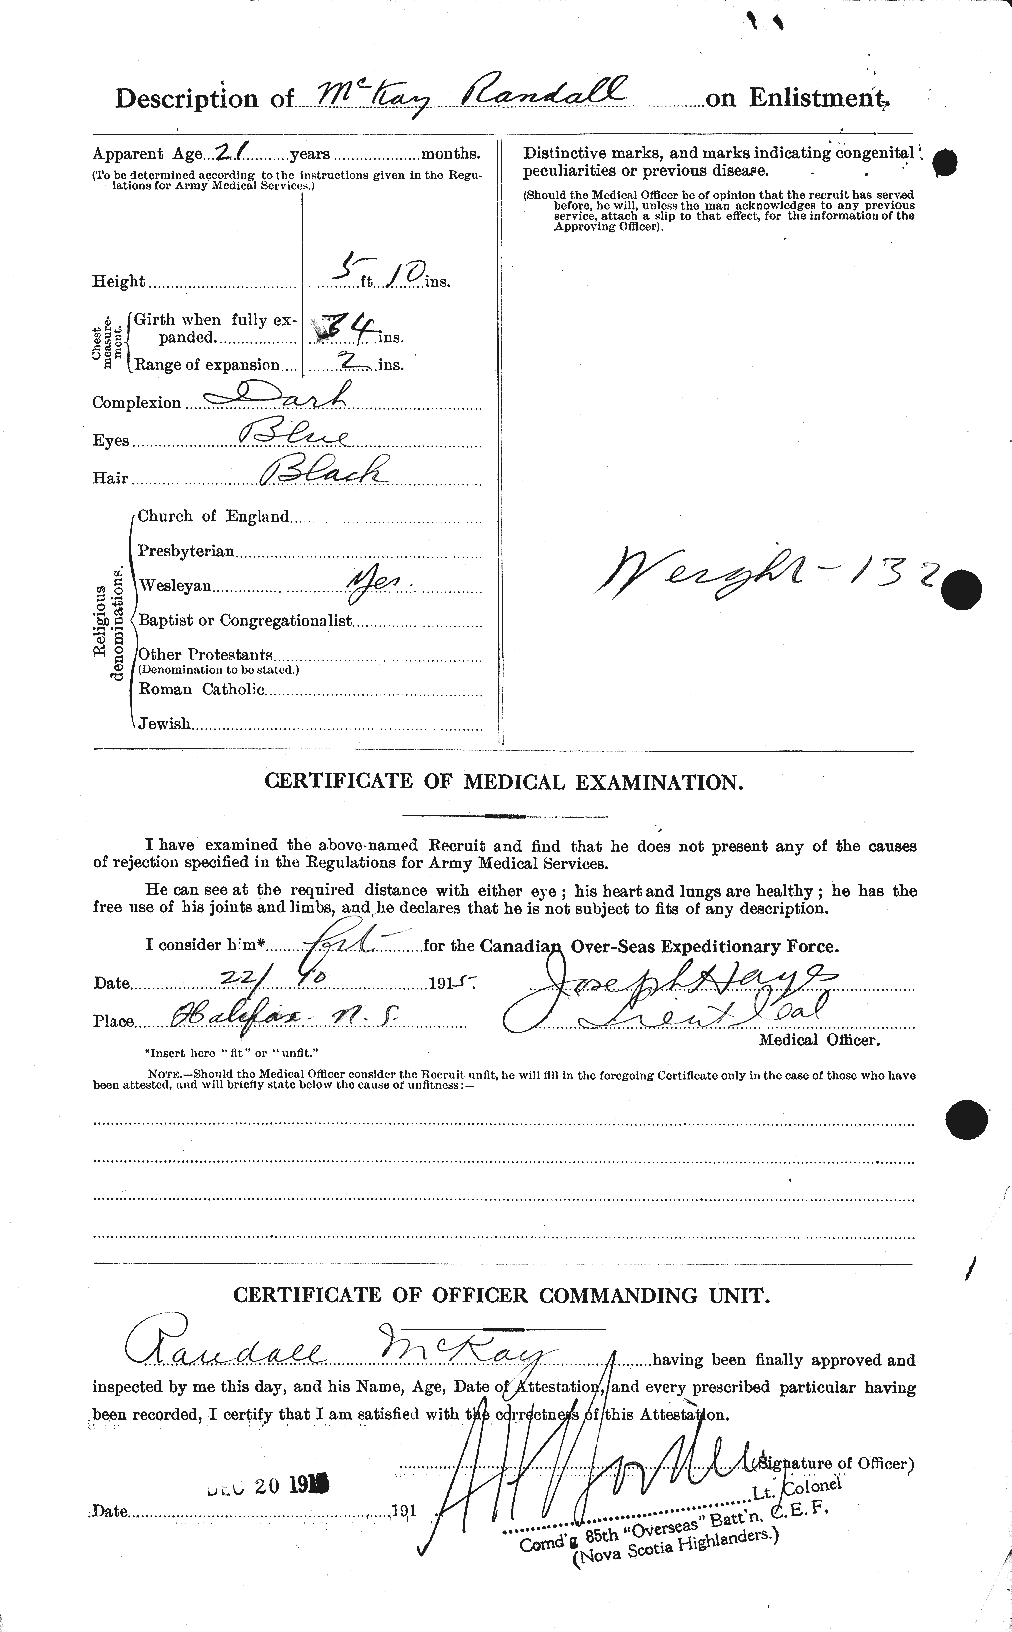 Personnel Records of the First World War - CEF 530055b